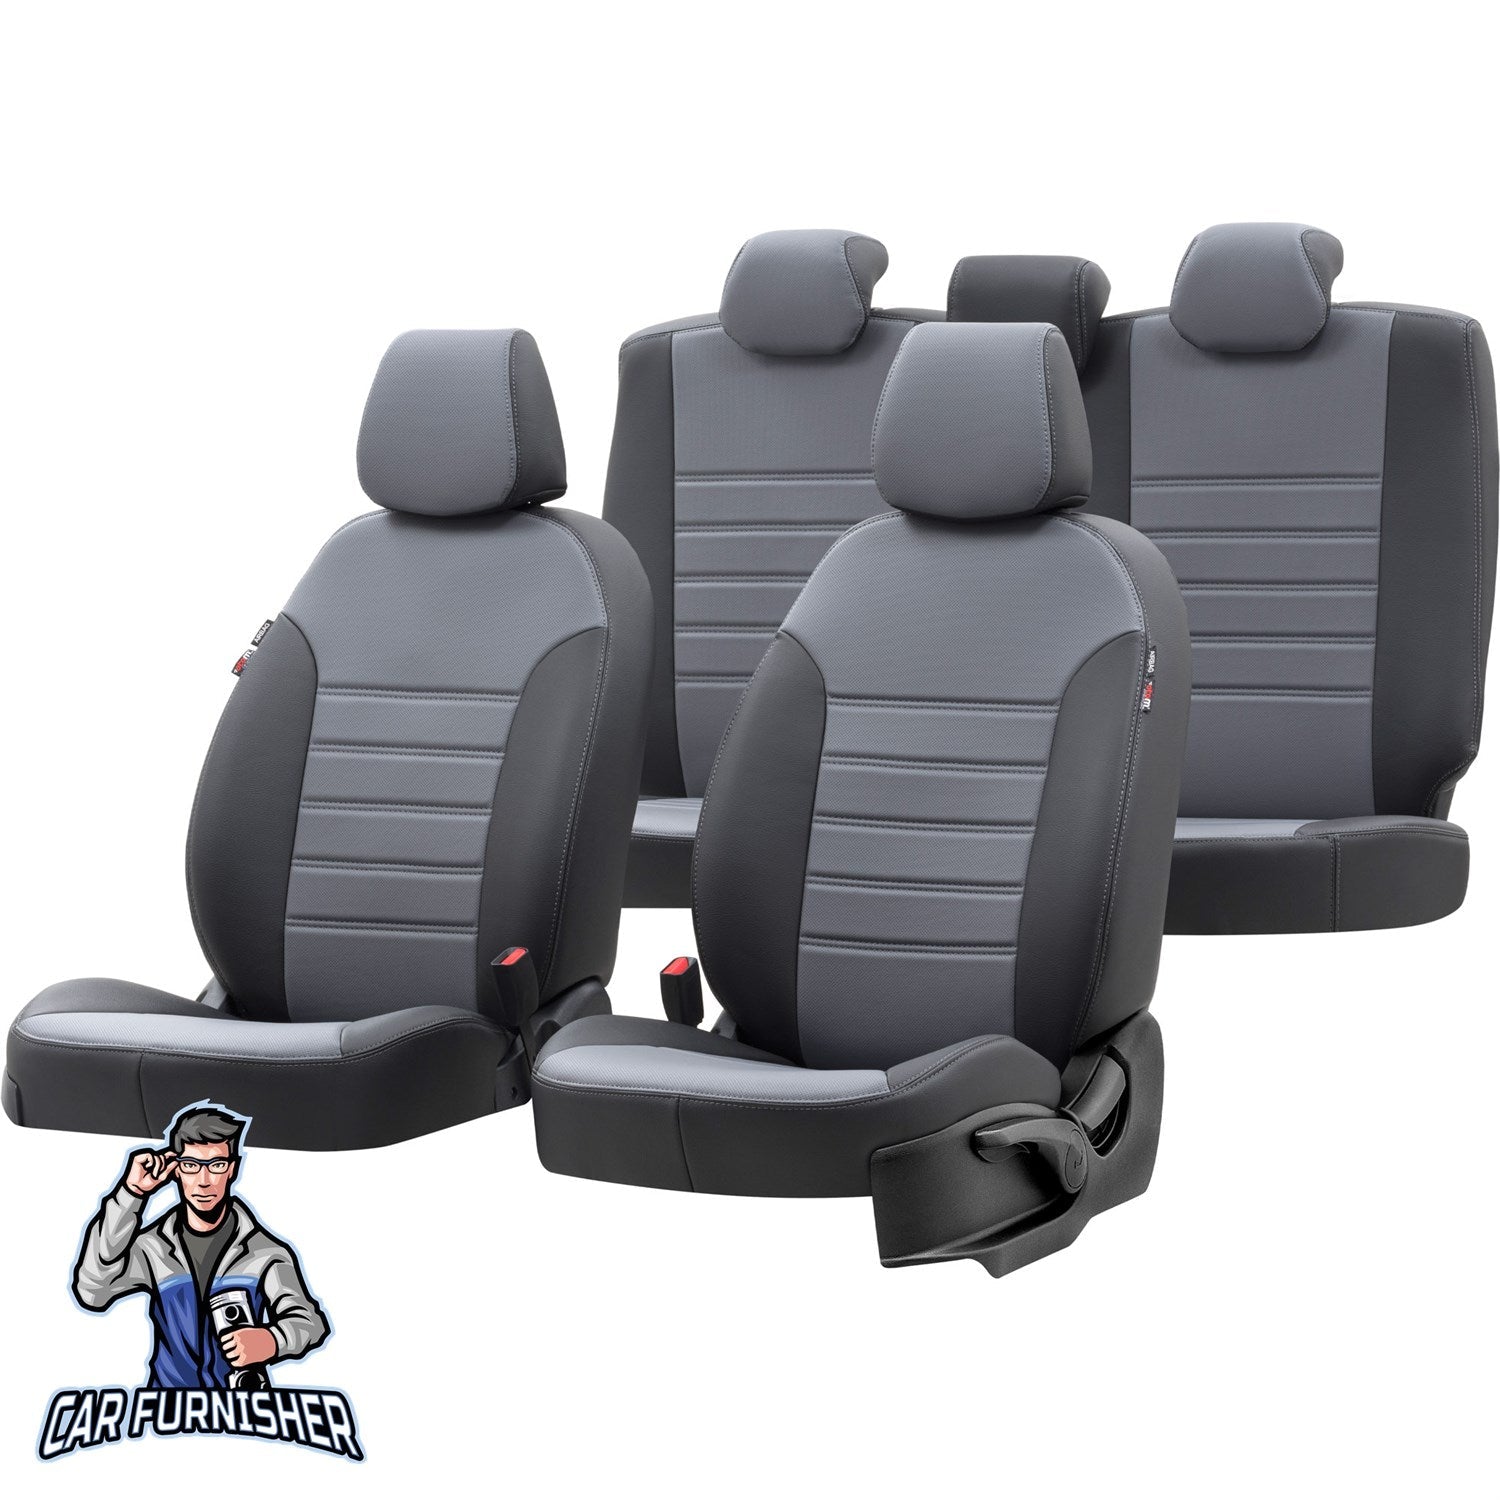 Citroen Jumper Seat Covers Istanbul Leather Design Smoked Black Leather